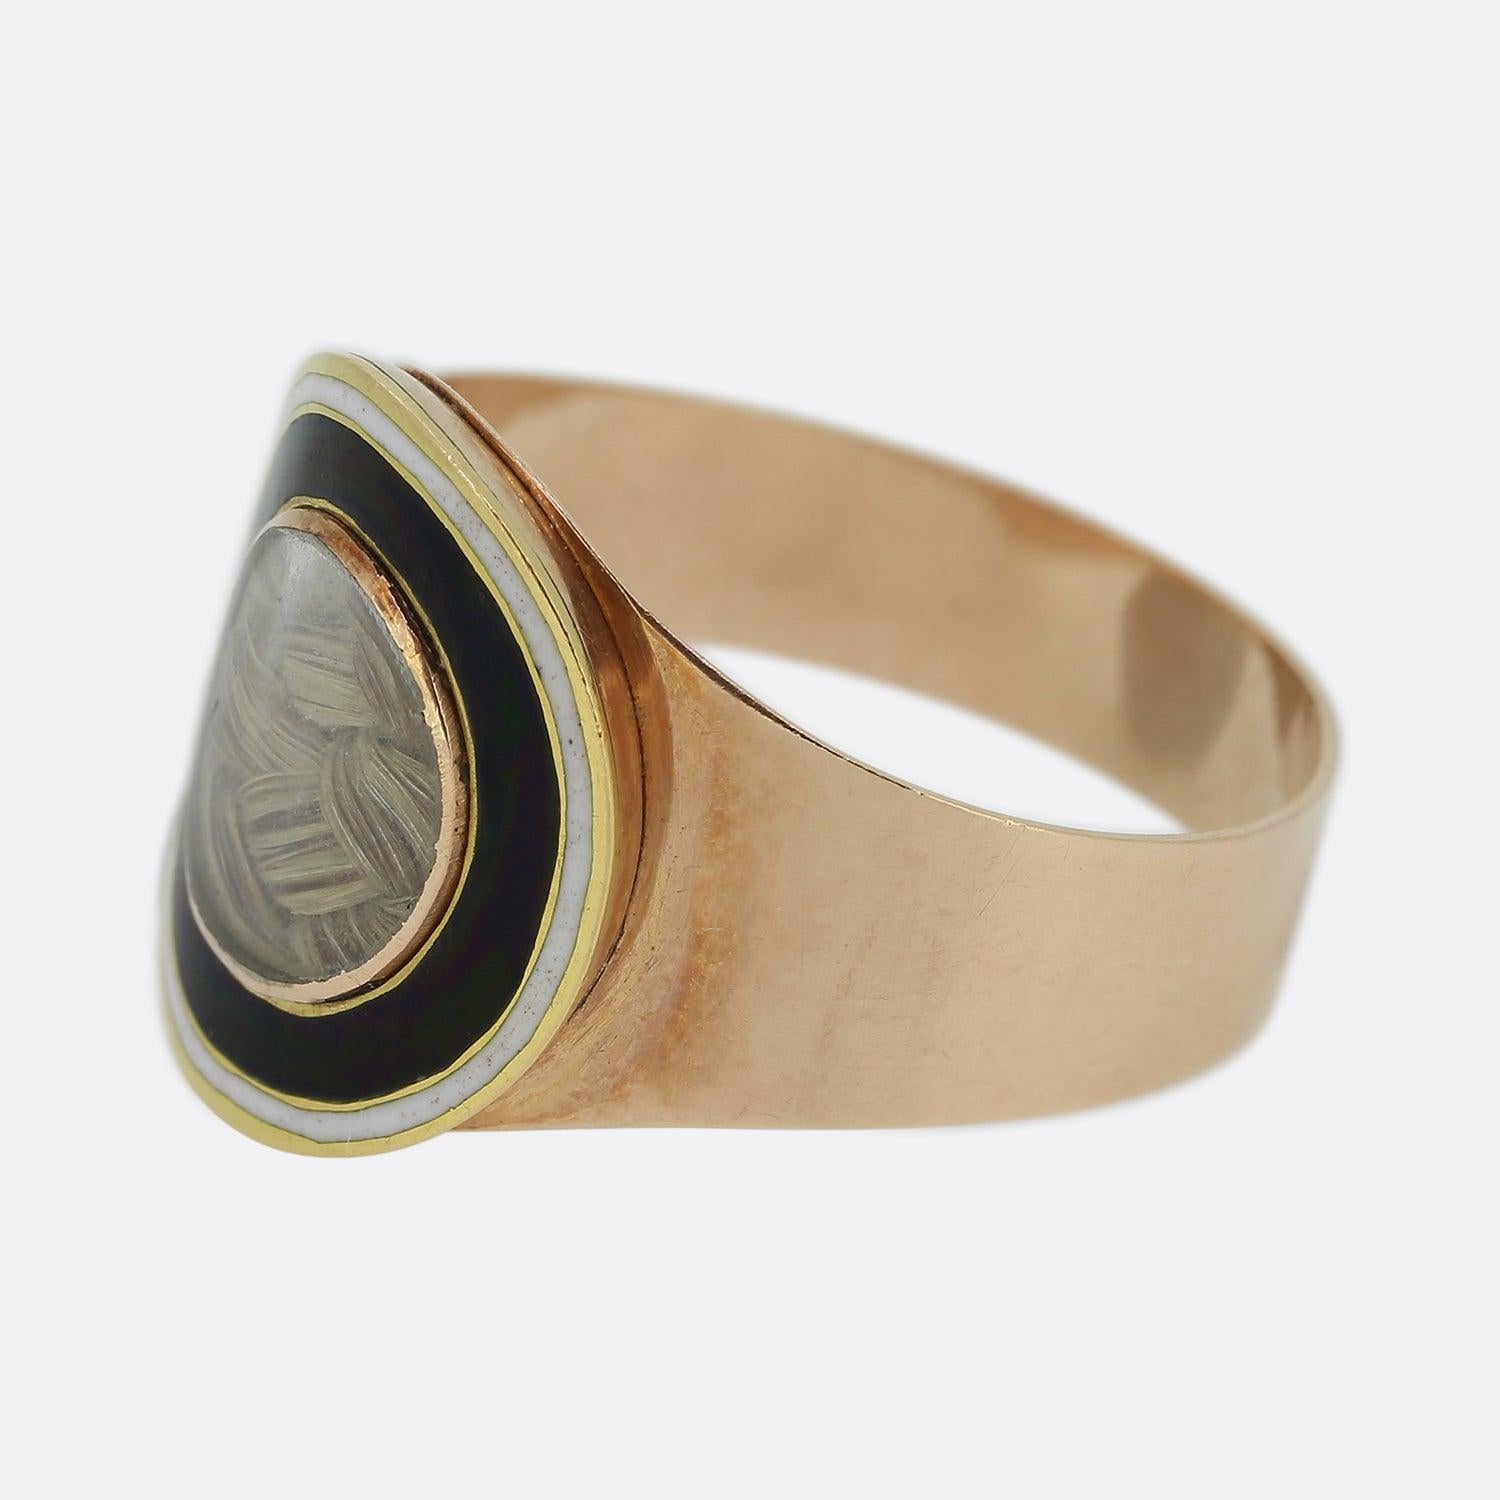 This is a wonderful 15ct rose gold mourning ring from the late Georgian era. The piece has been set with a centralised round window that features a small locket of hair and a border of black and white enamel around the outer edge. The piece is